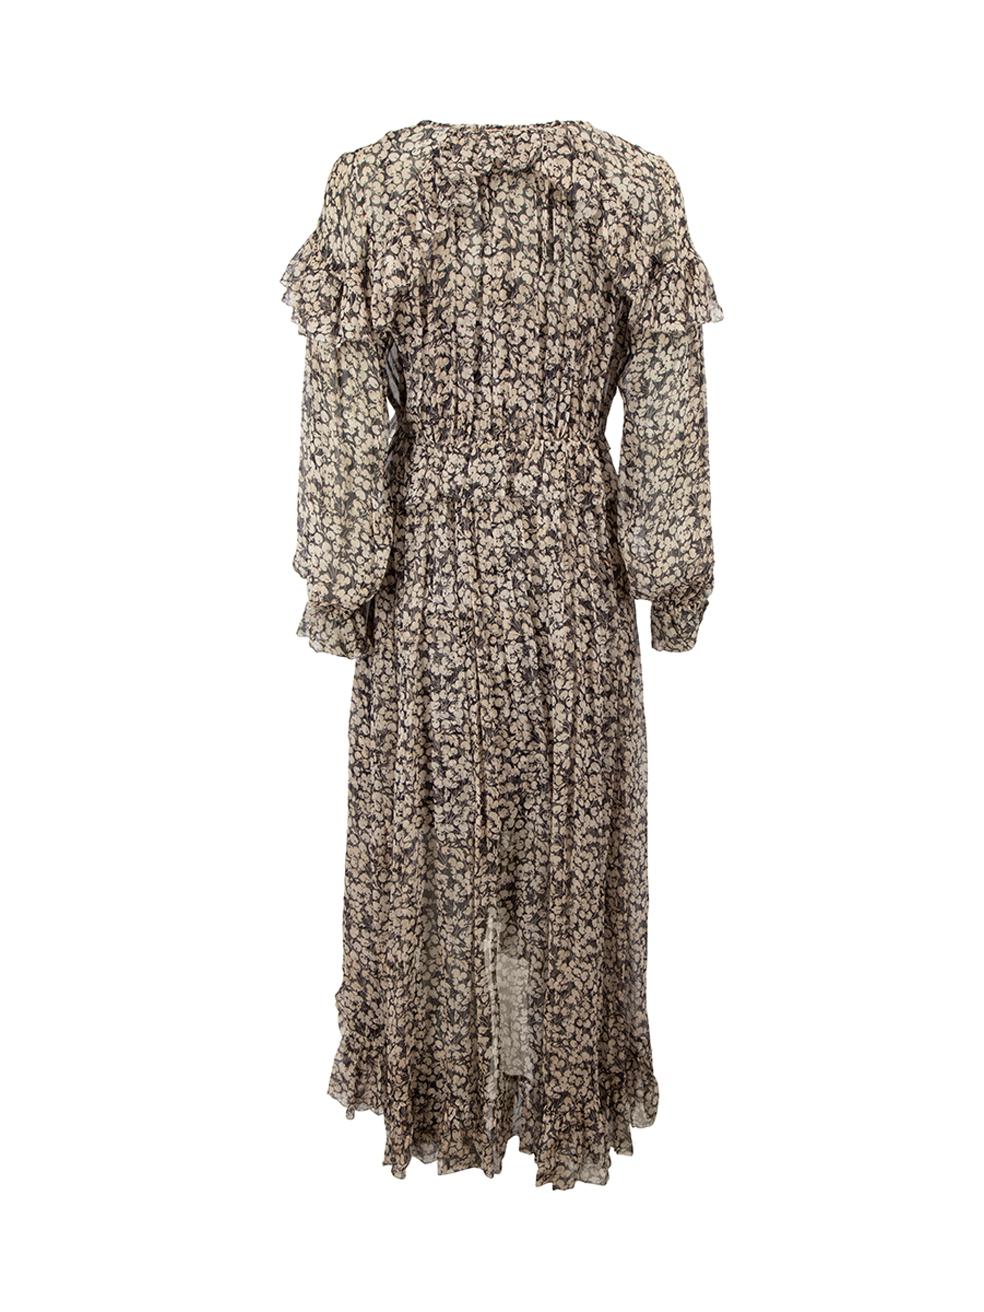 Zimmermann Brown Silk Printed Midi Dress Size M In Good Condition For Sale In London, GB